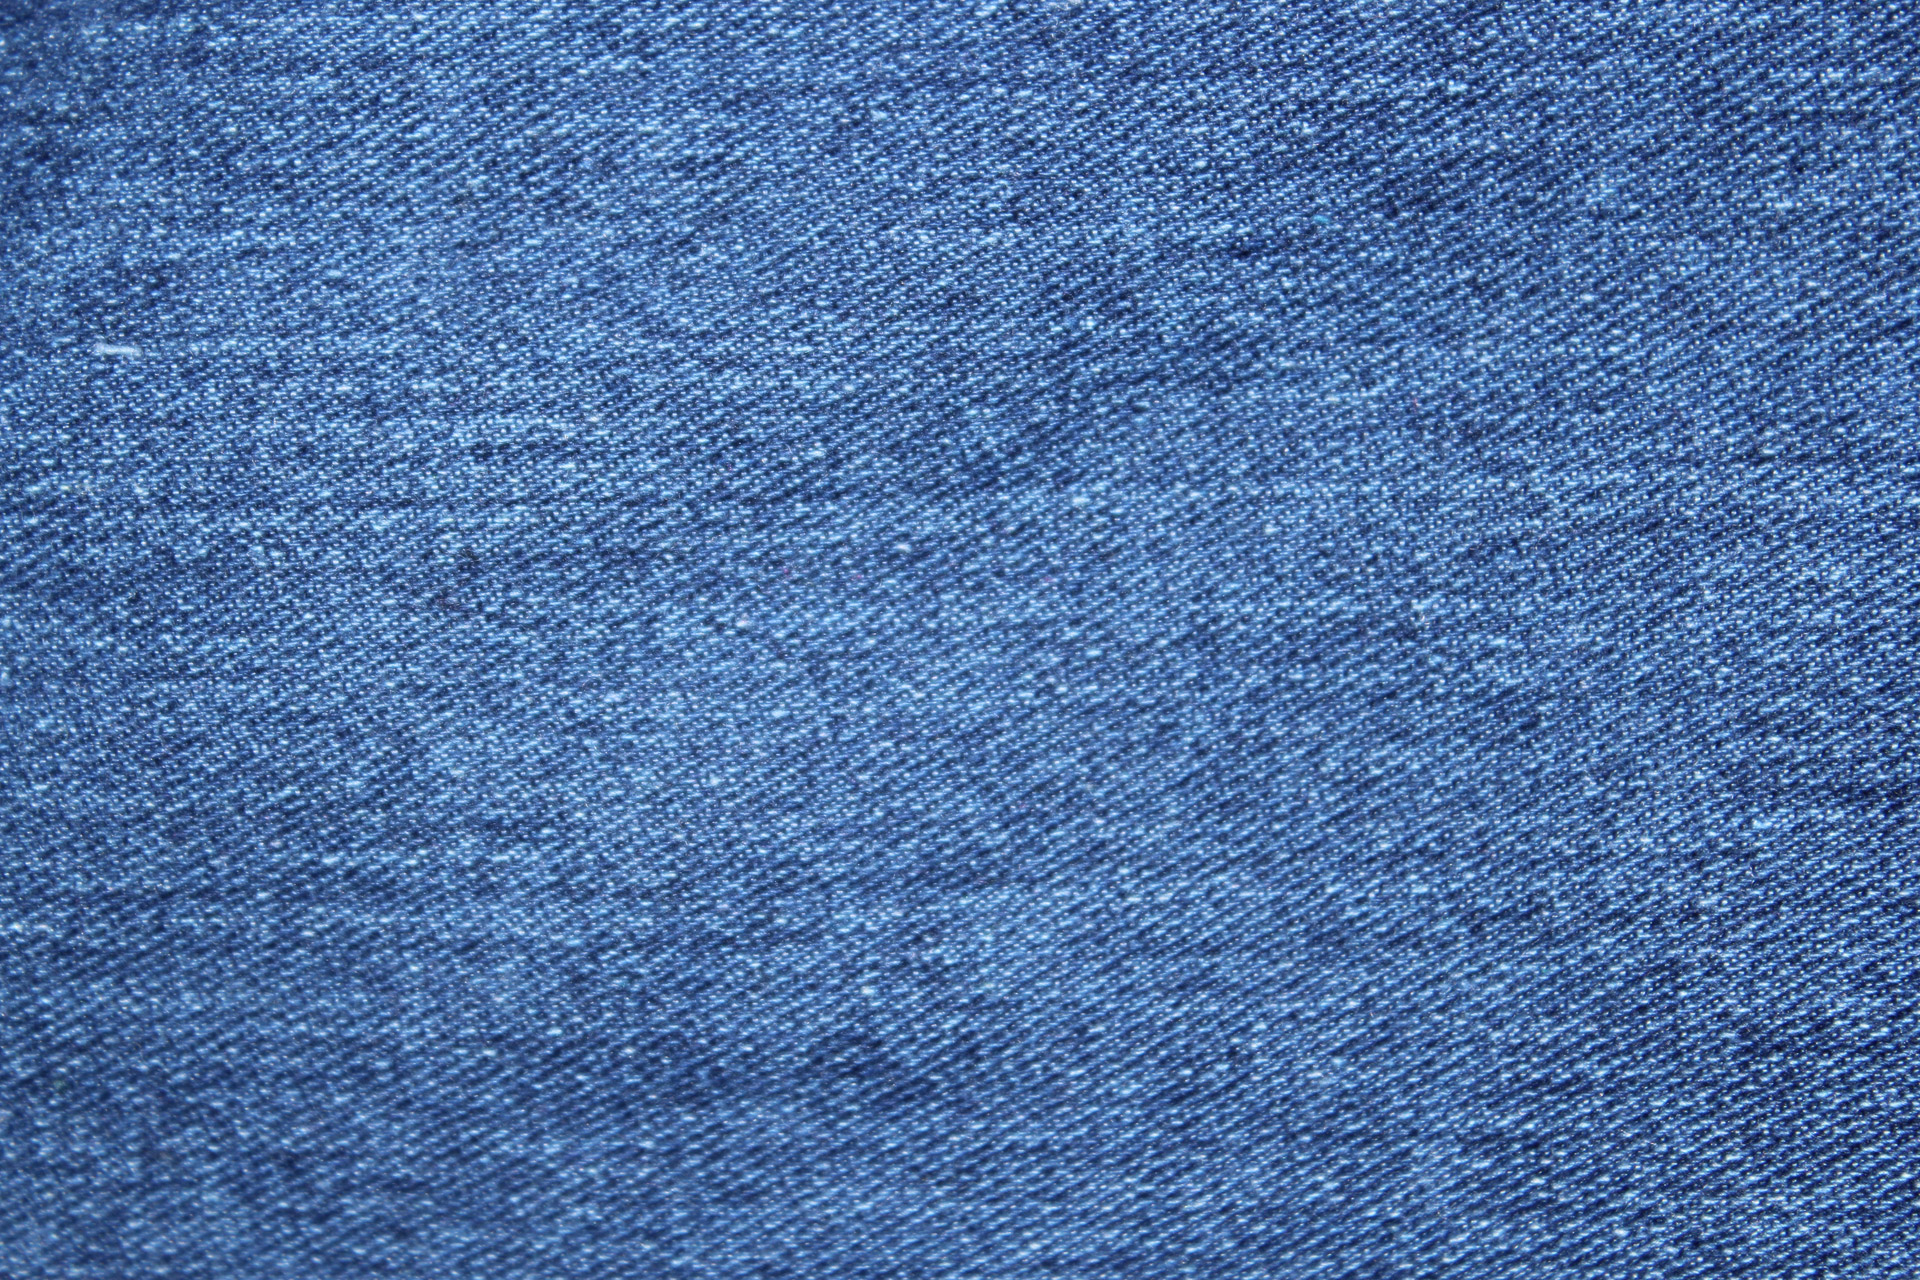 Denim Background 2 Free Stock Photo Public Domain Pictures HD Wallpapers Download Free Images Wallpaper [wallpaper981.blogspot.com]